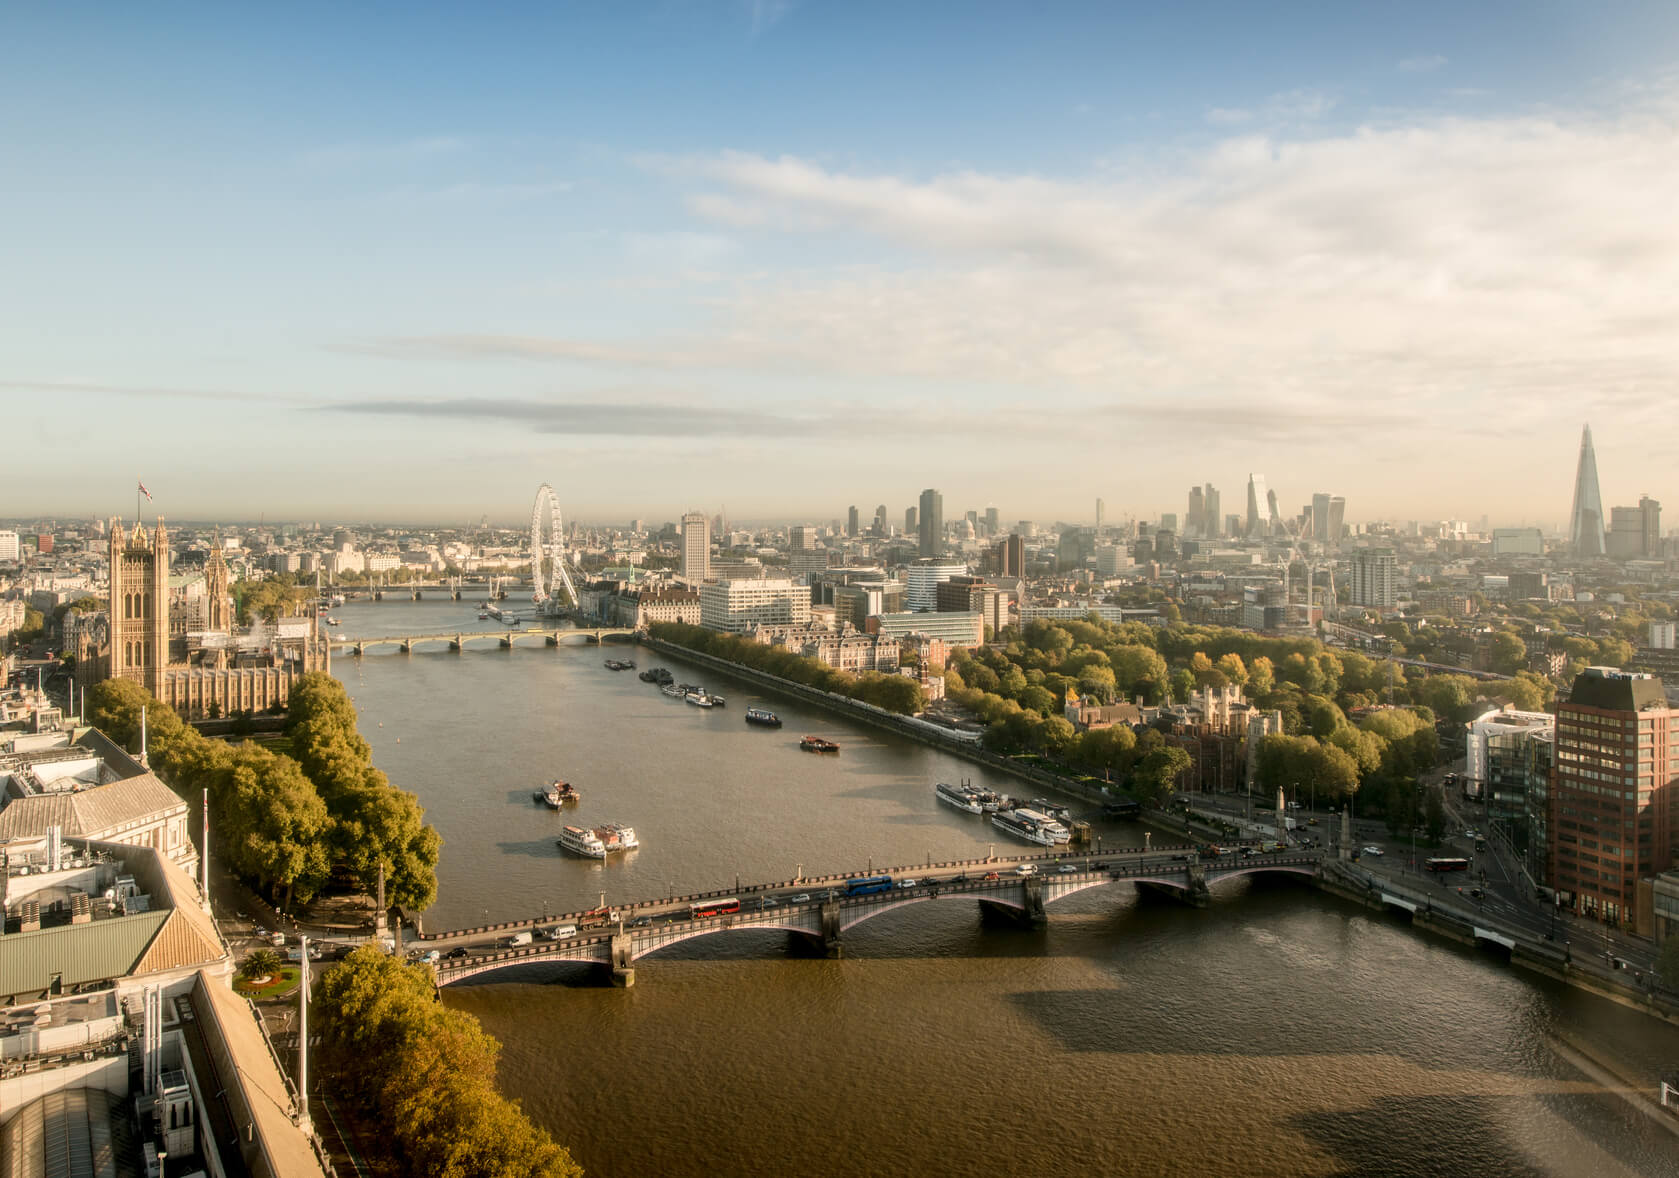 An overarching shot of London overlooking the River Thames and downtown London